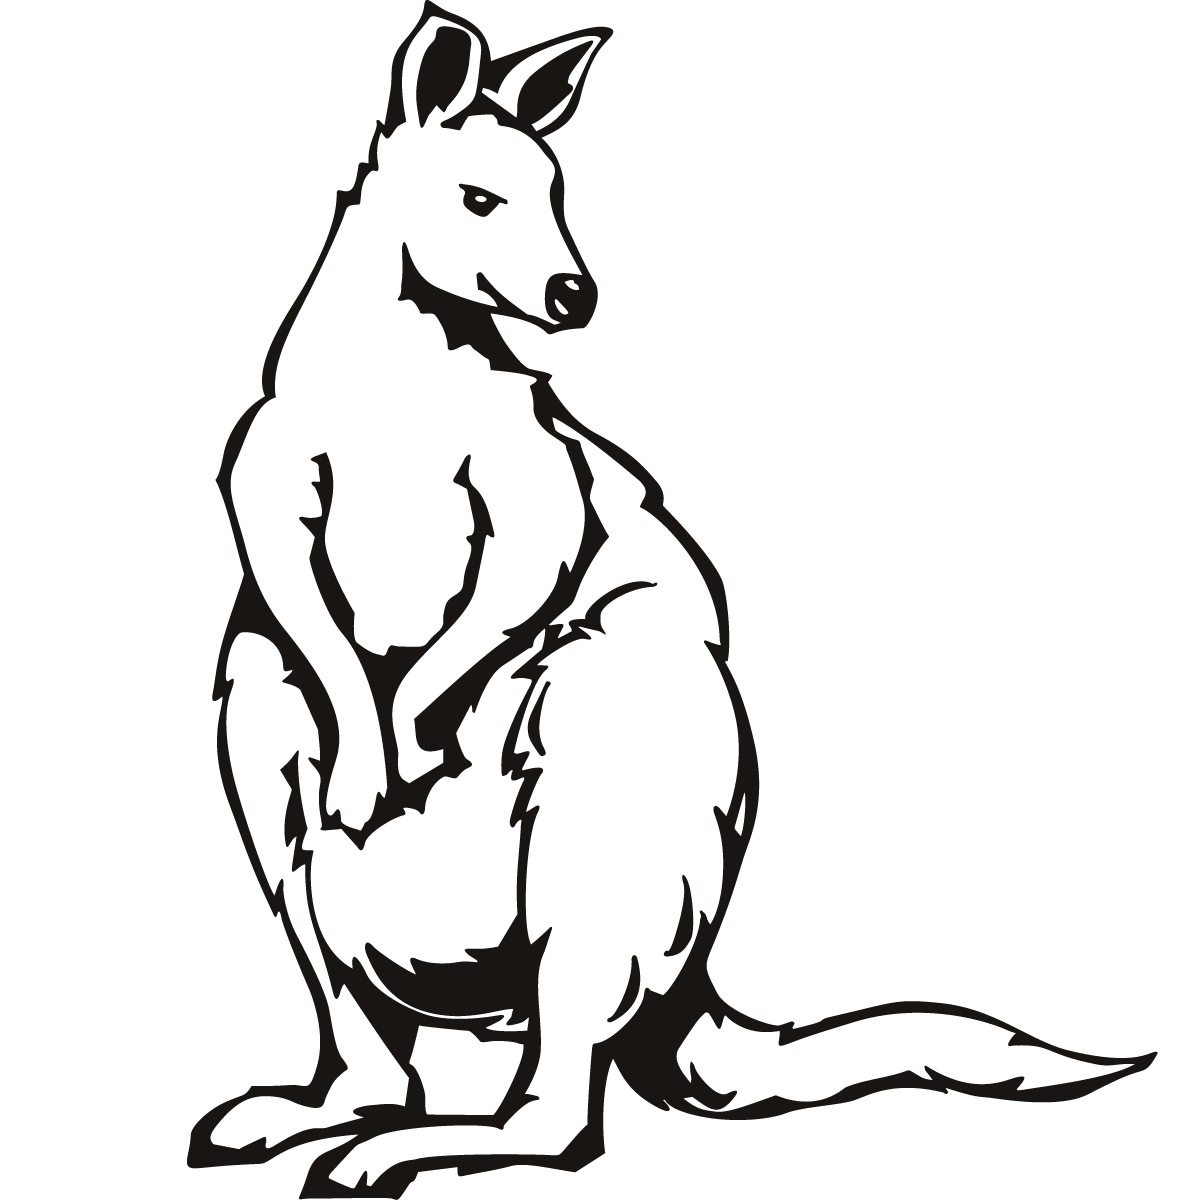 Kangaroo Color Page Free Kangaroo Pictures To Color Download Free Clip Art Free Clip